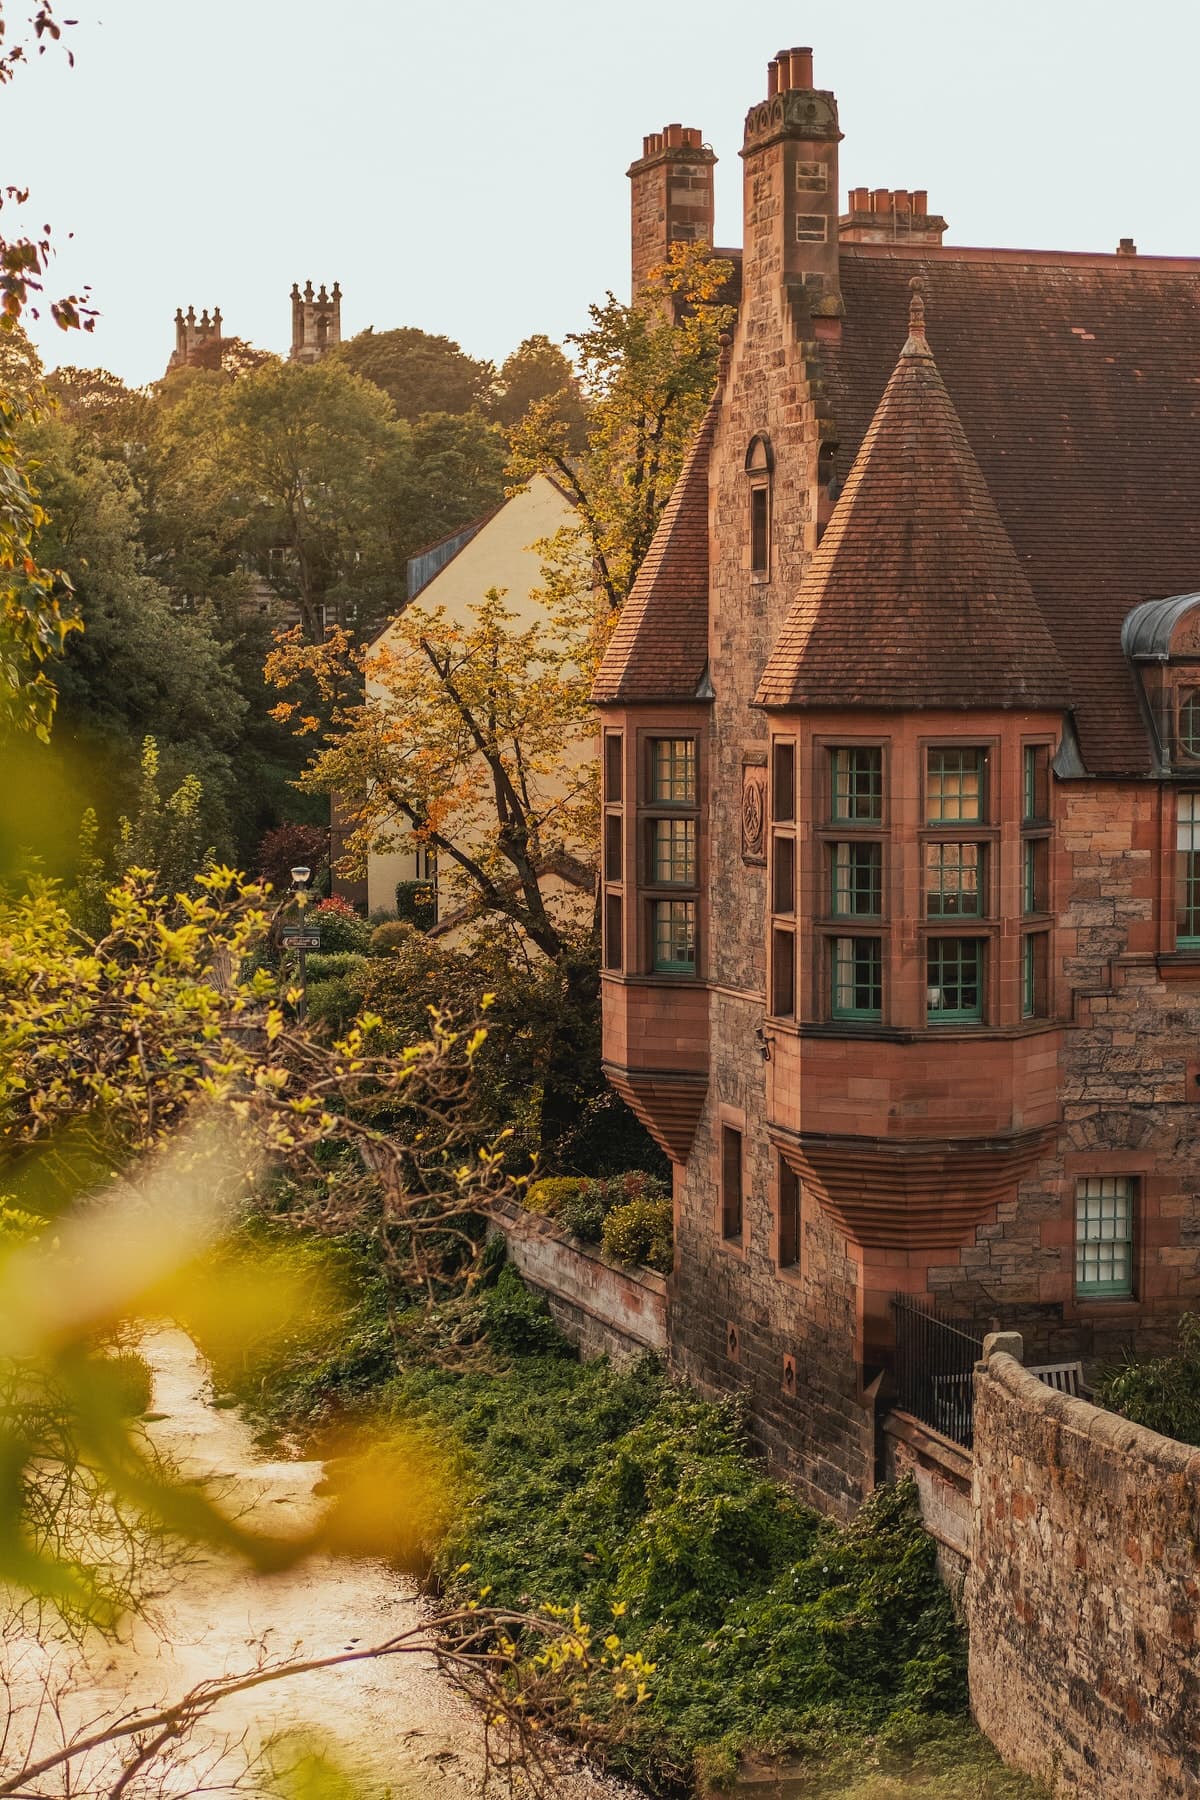 Scottish architecture in the autumn, one of the highlights to where to elope in Edinburgh